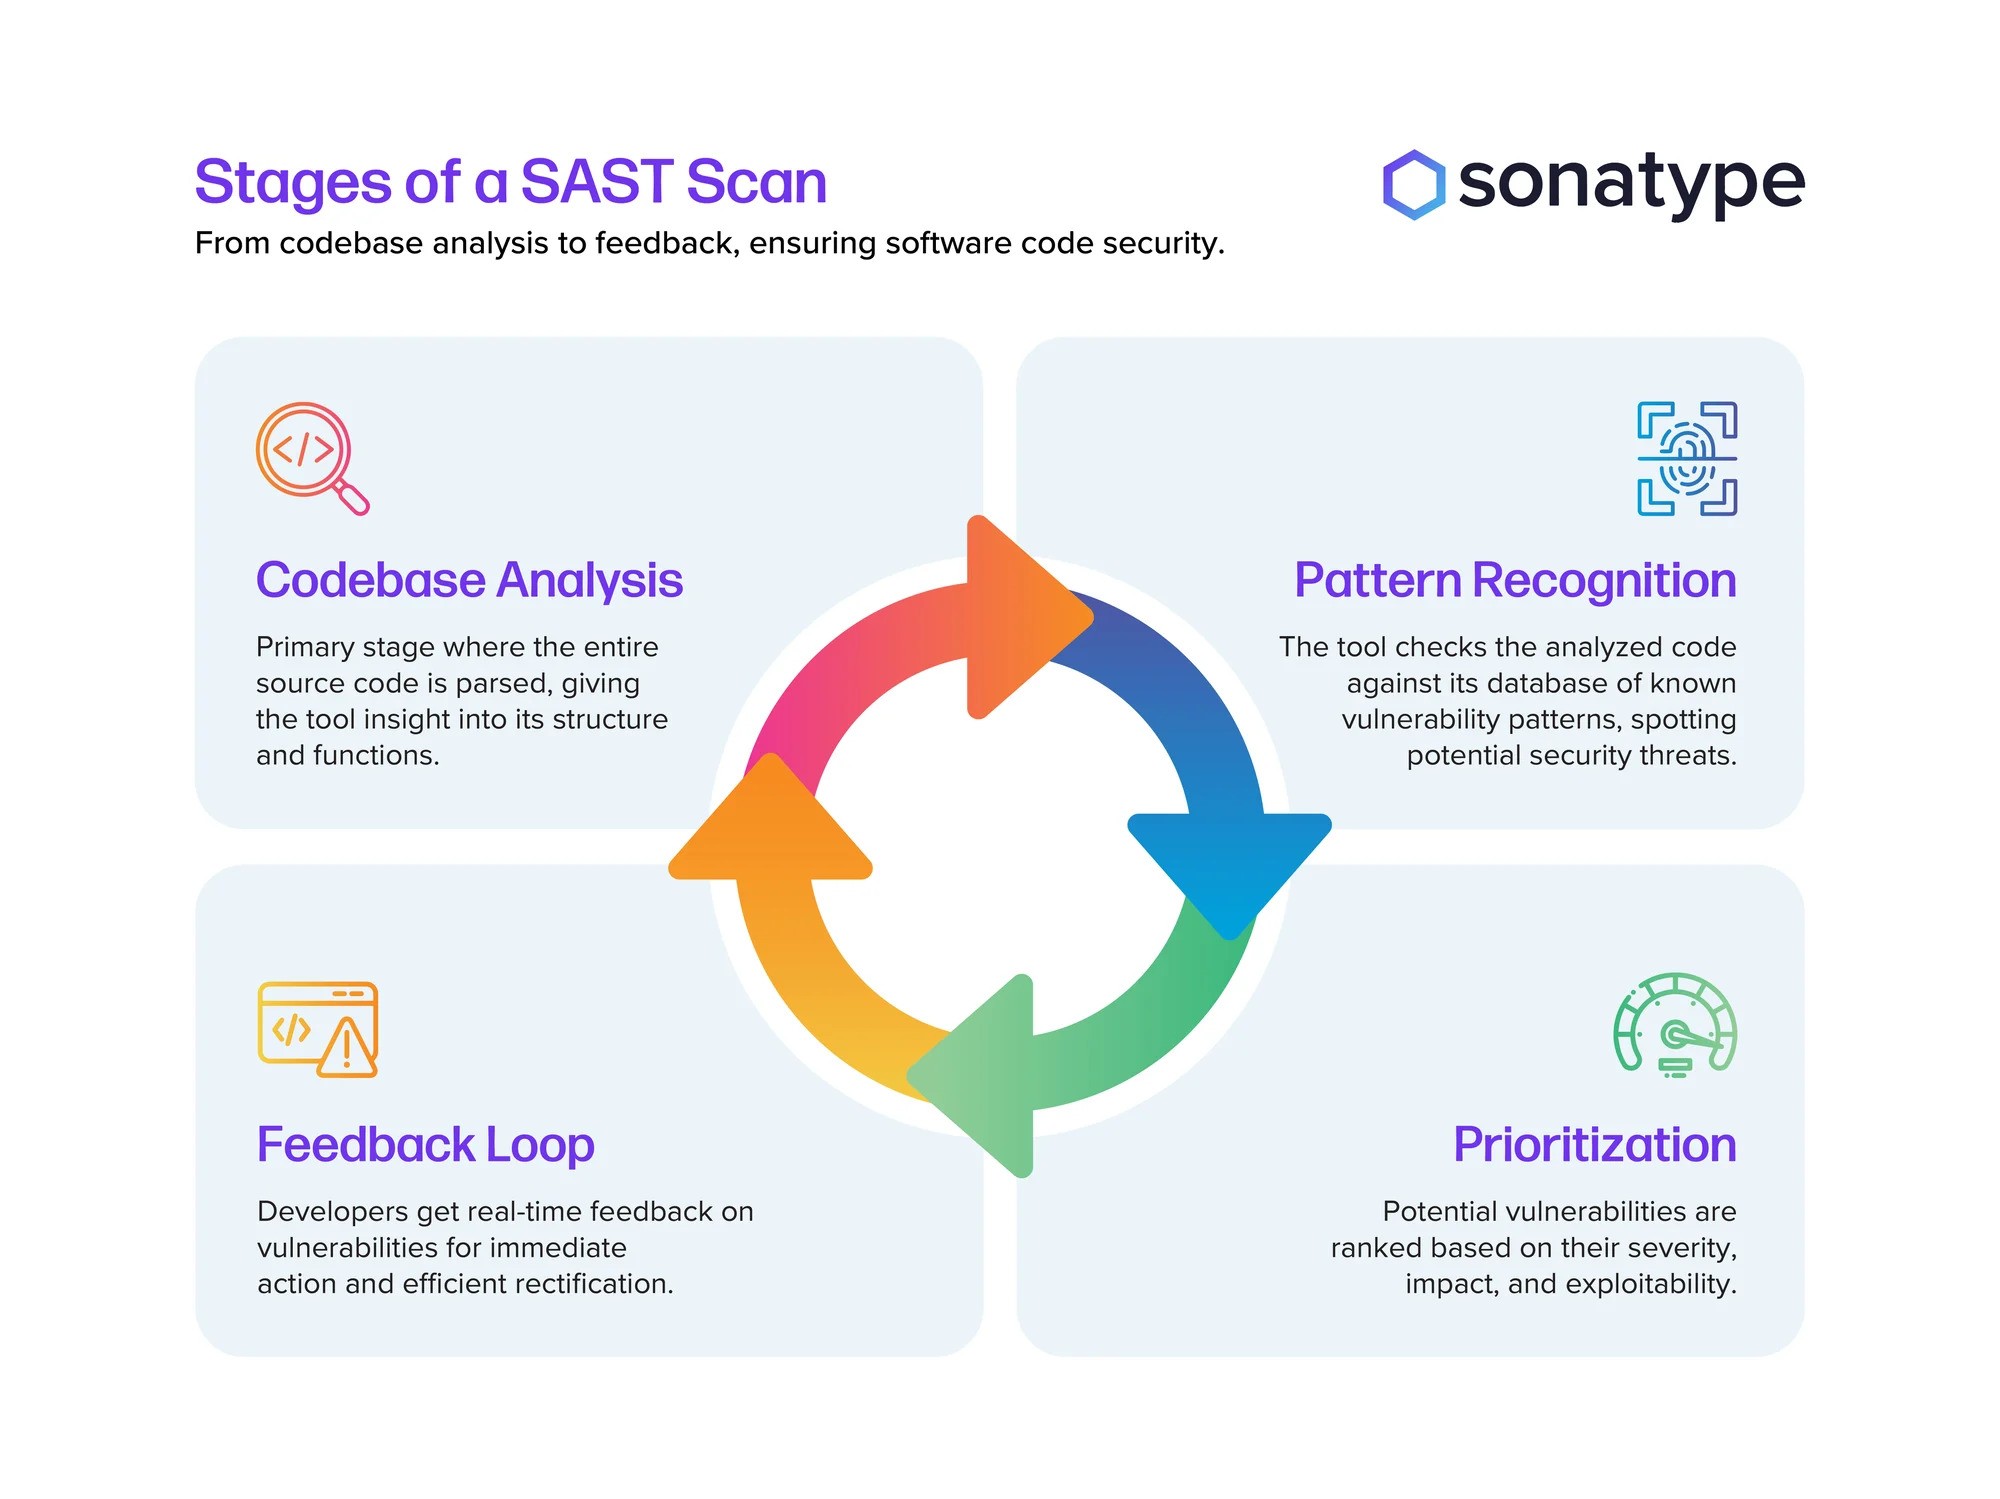 Stages of a SAST Scan by Sonatype